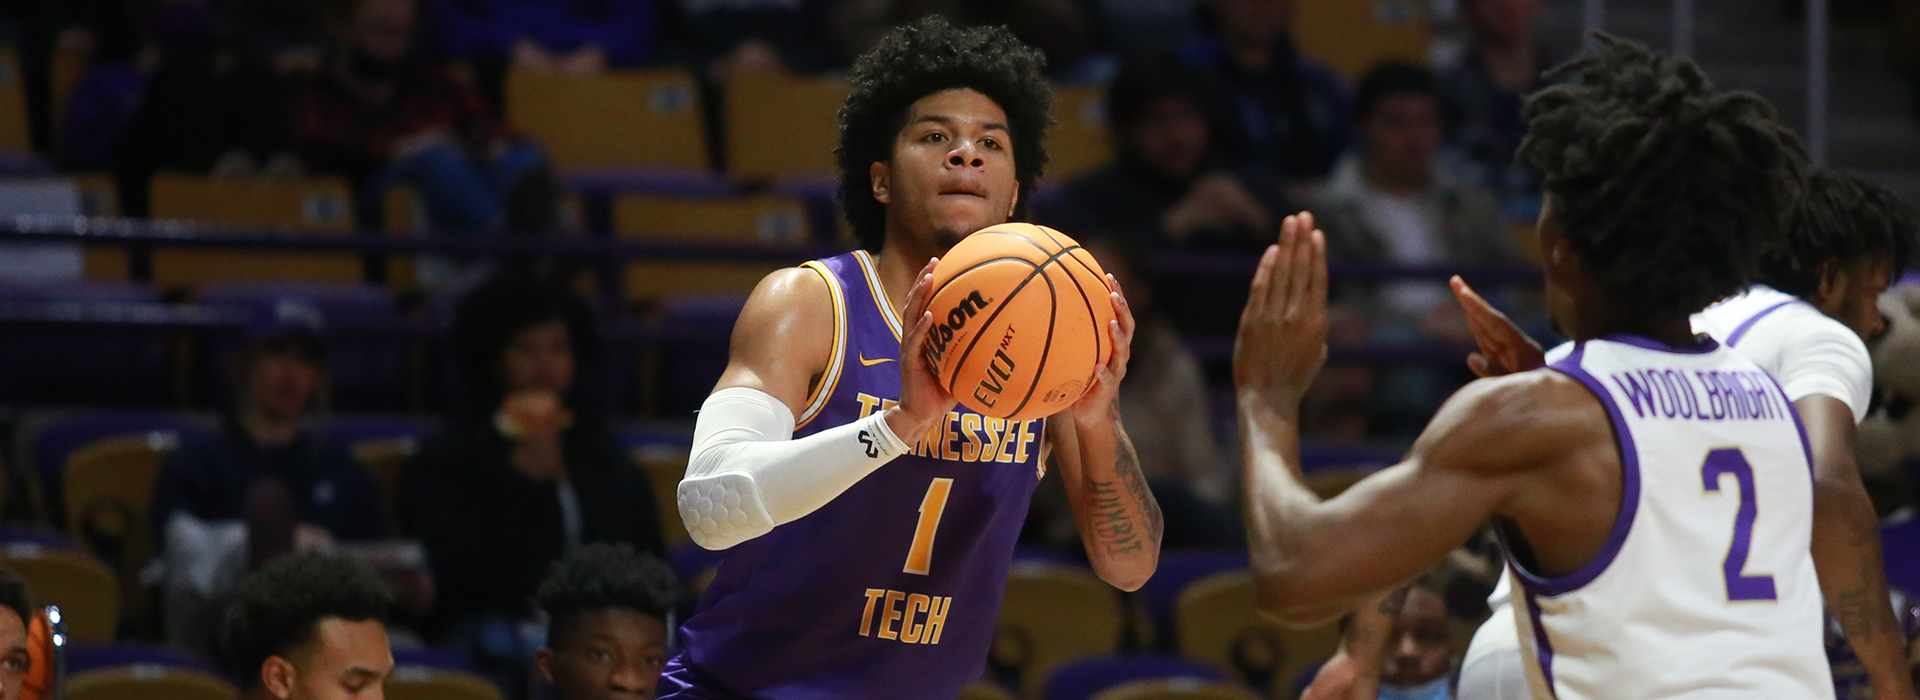 Tech men square off with SEMO for first meeting of season Thursday